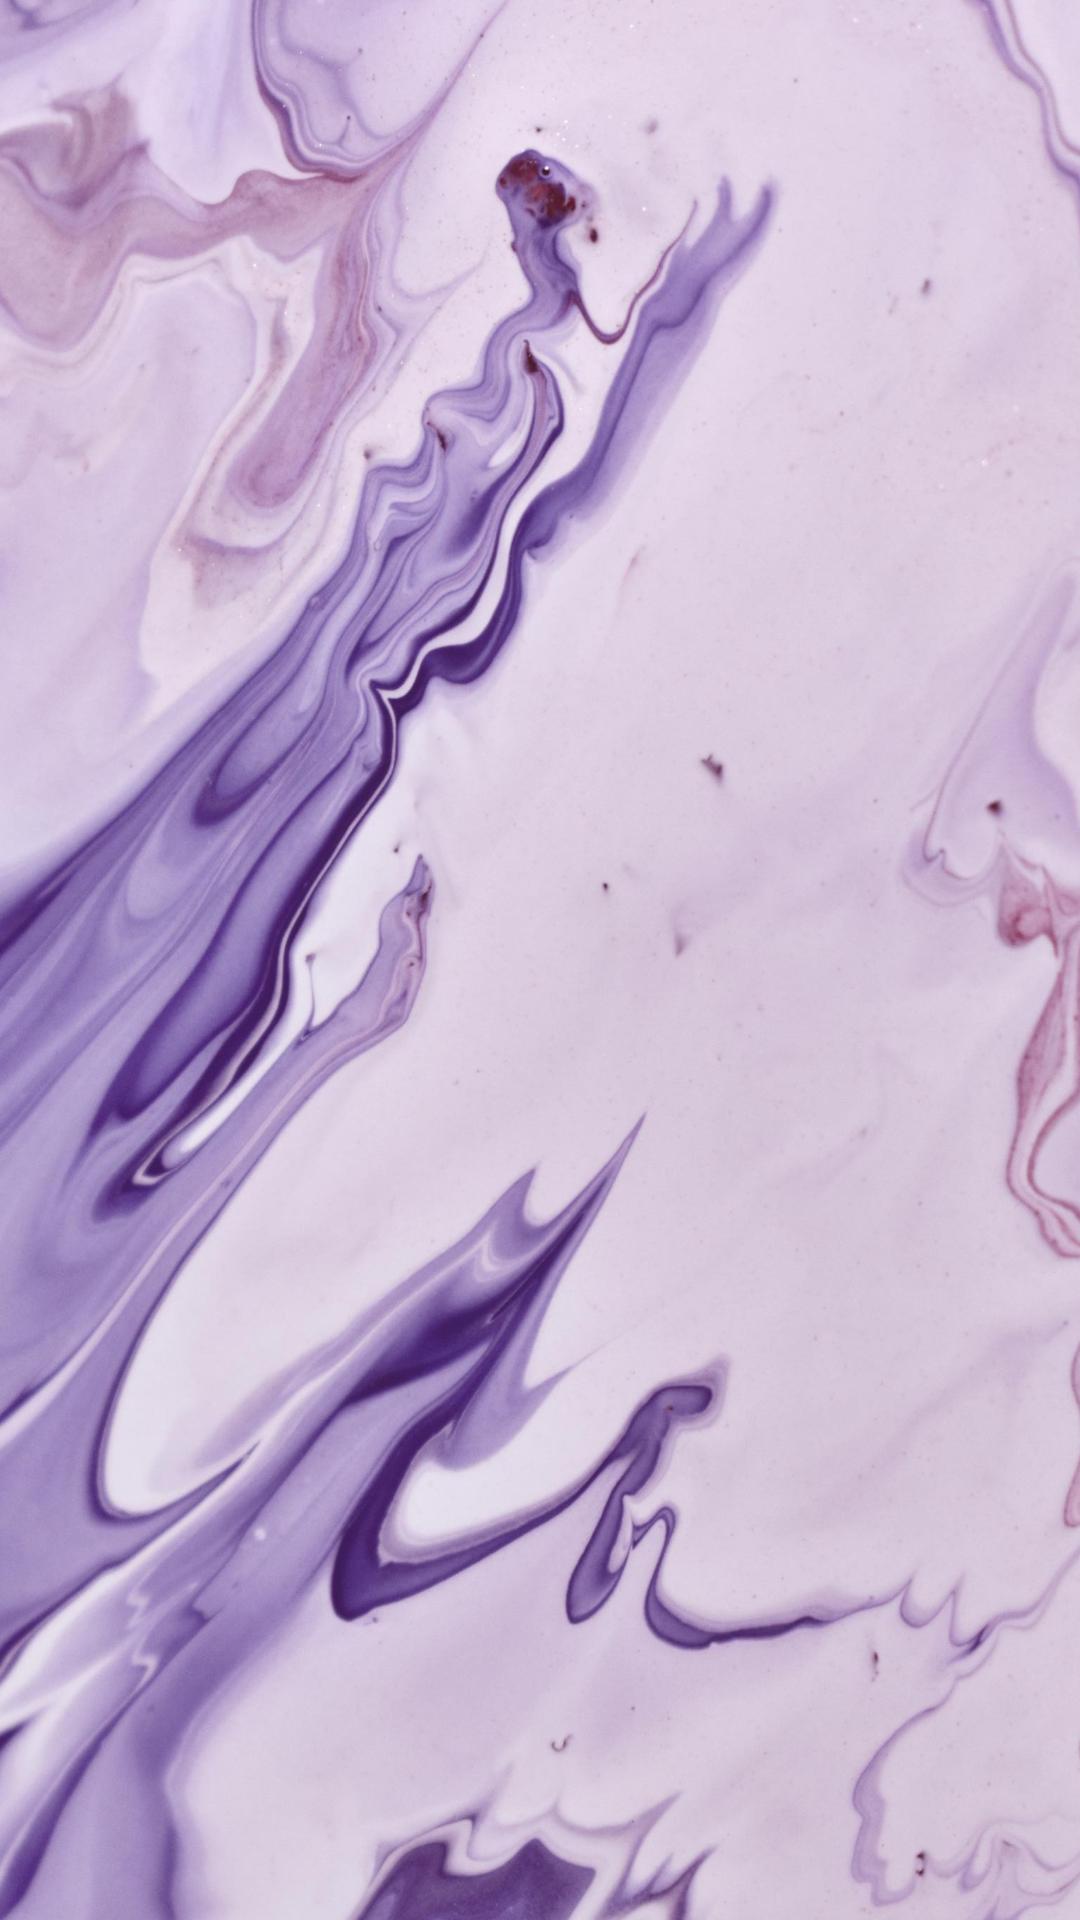 IPhone wallpaper of a purple and white swirled paint pattern - Lavender